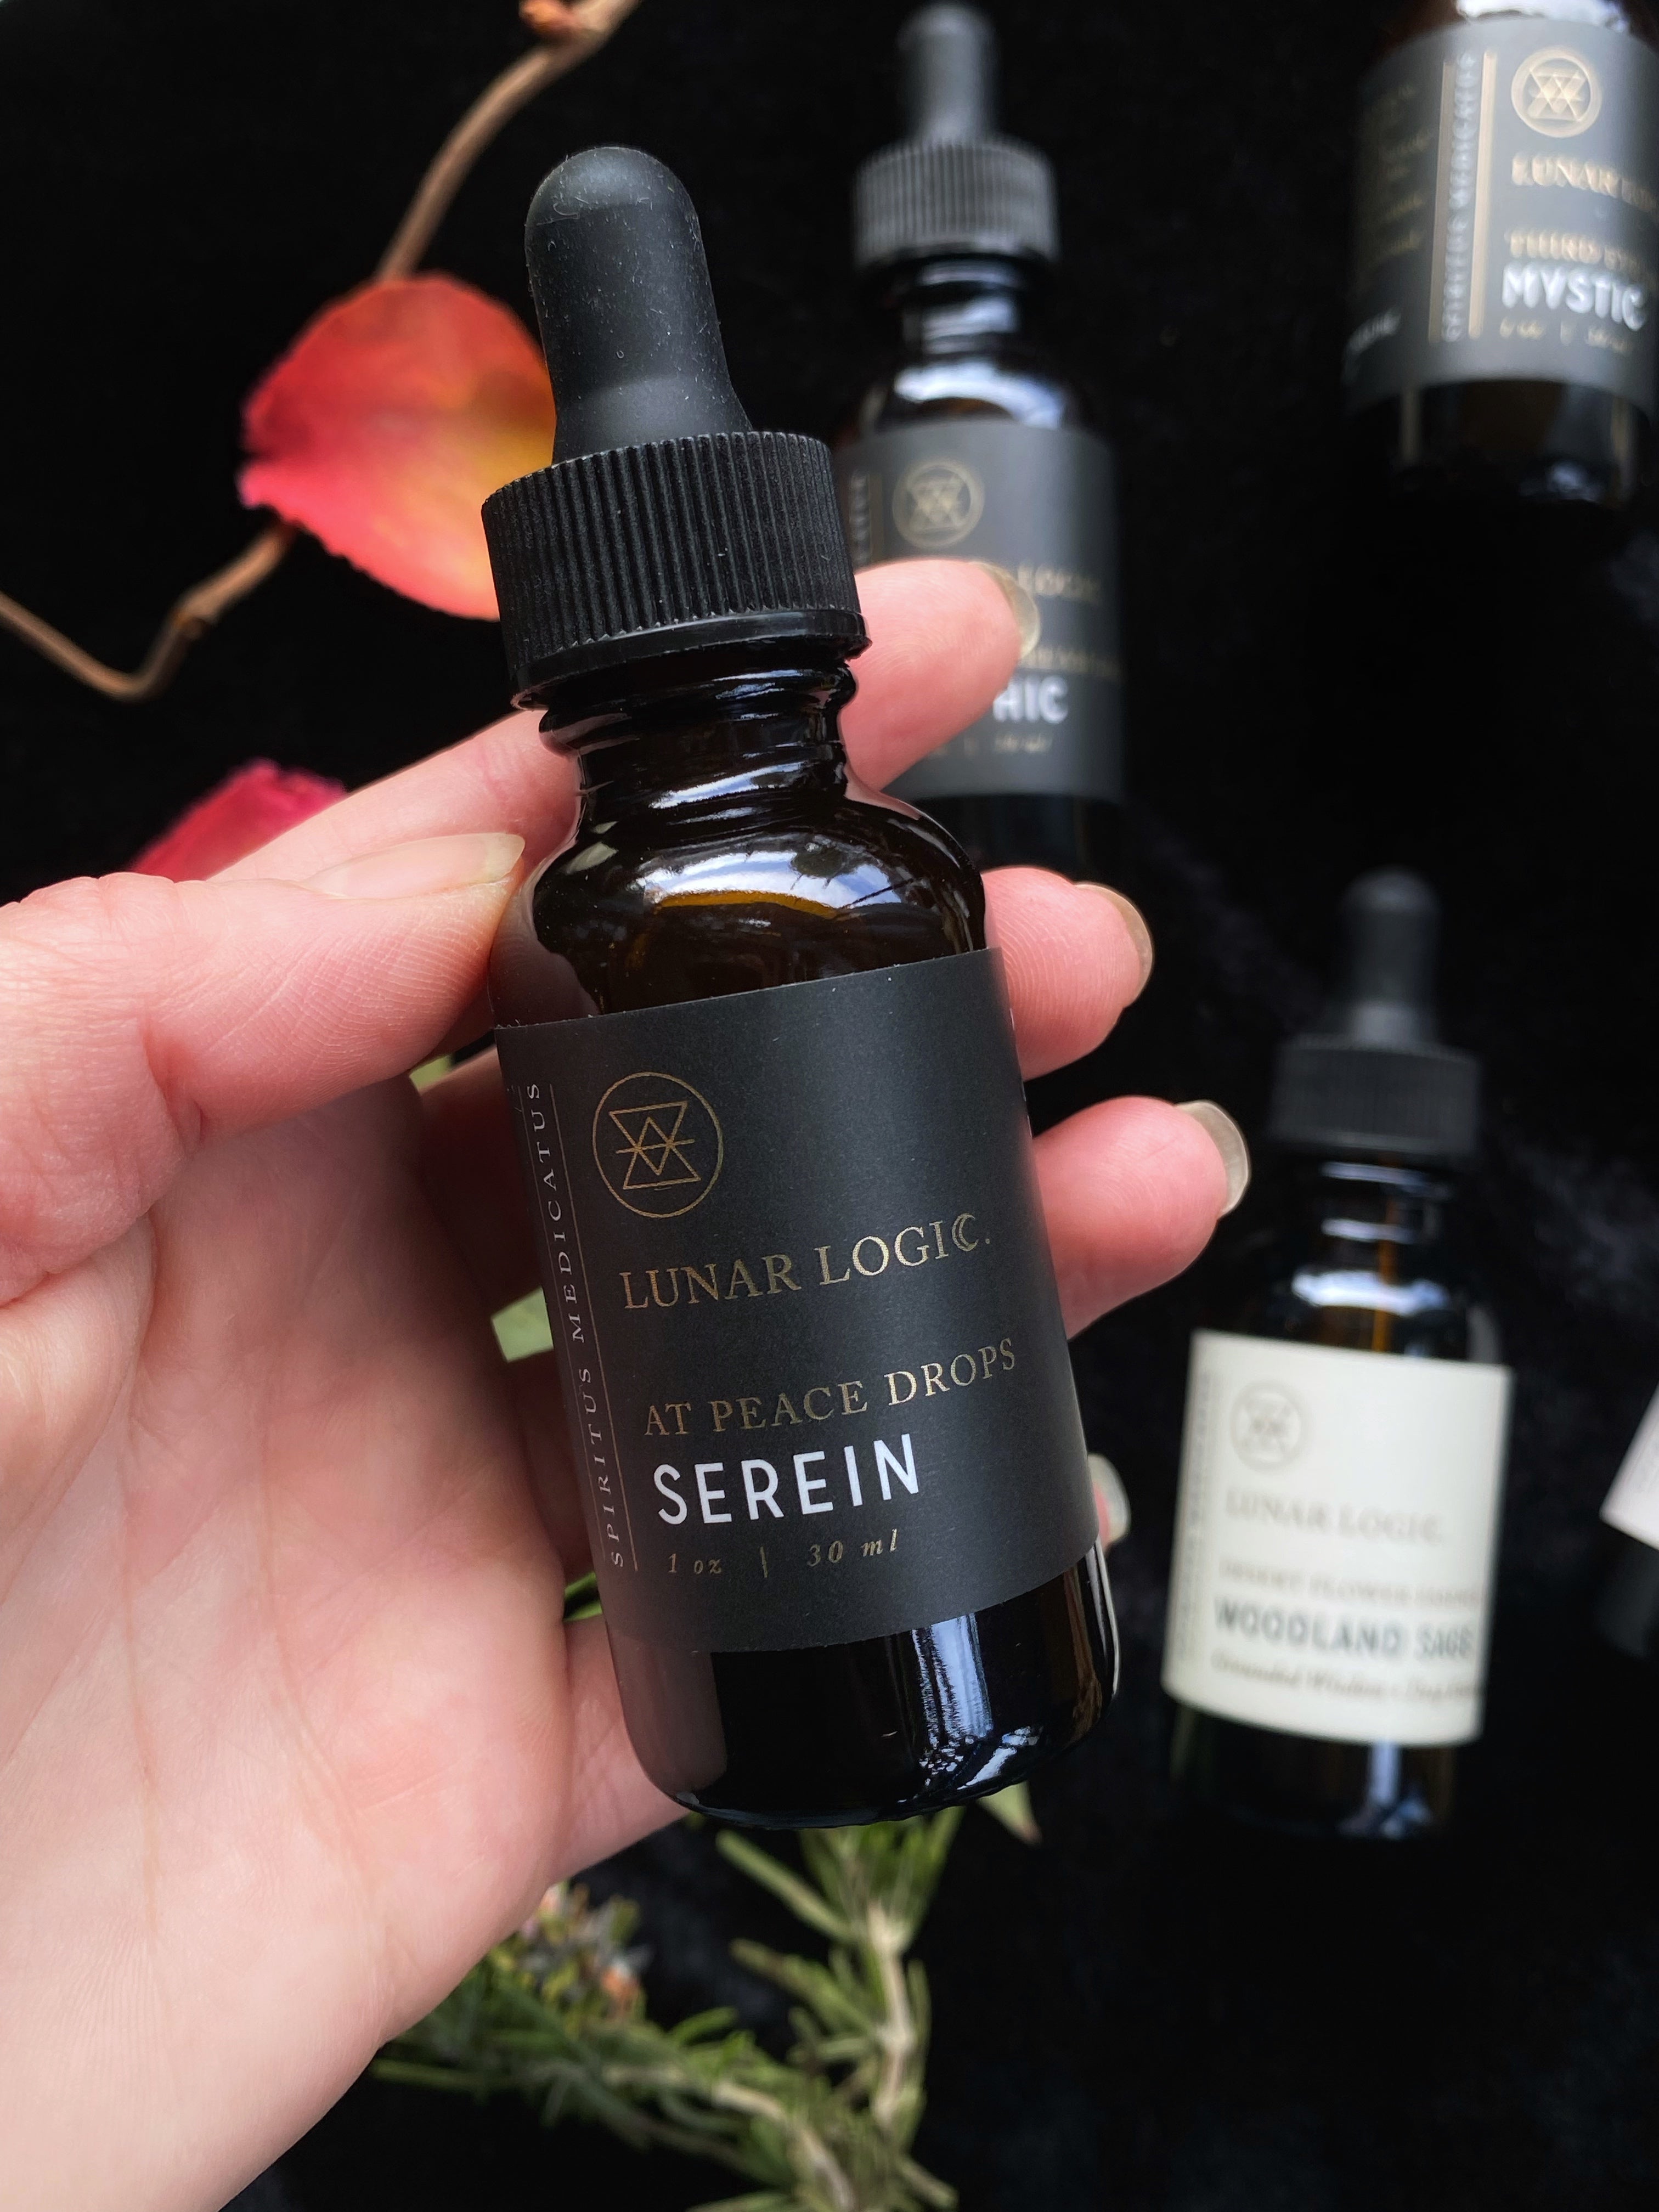 SEREIN / At Peace Drops - Herbal Extract